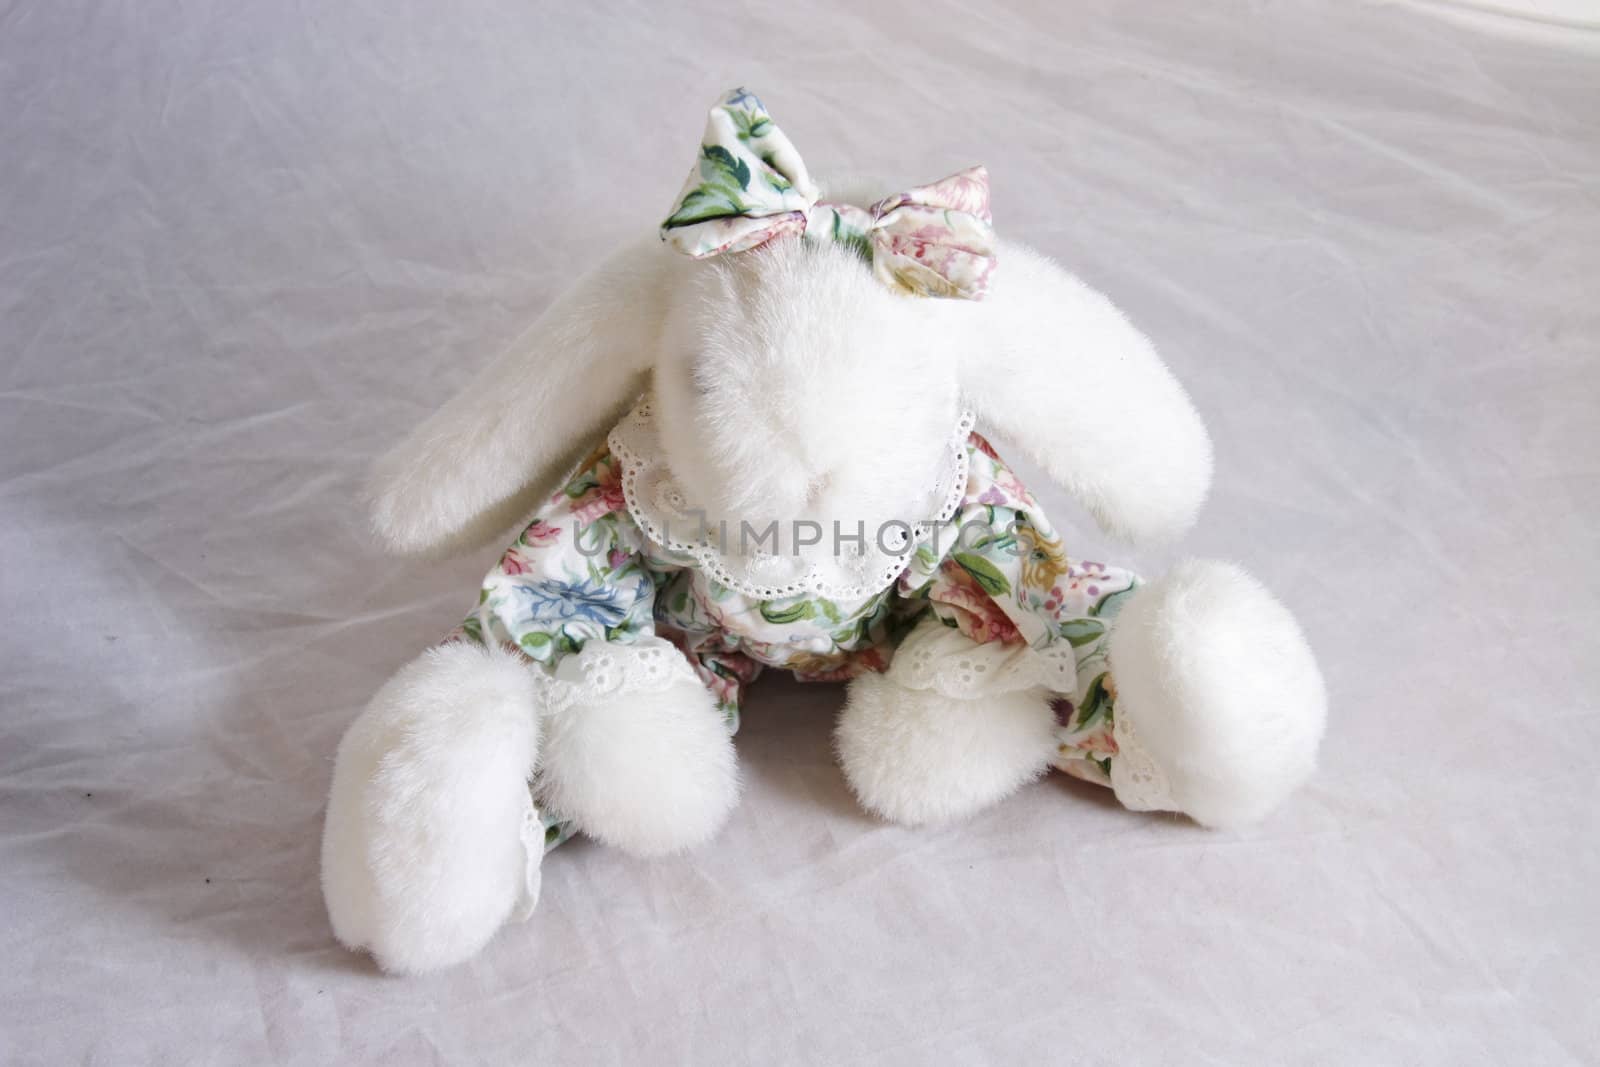 small white bunny rabbit toy dressed in a florel suit with a bow on its head